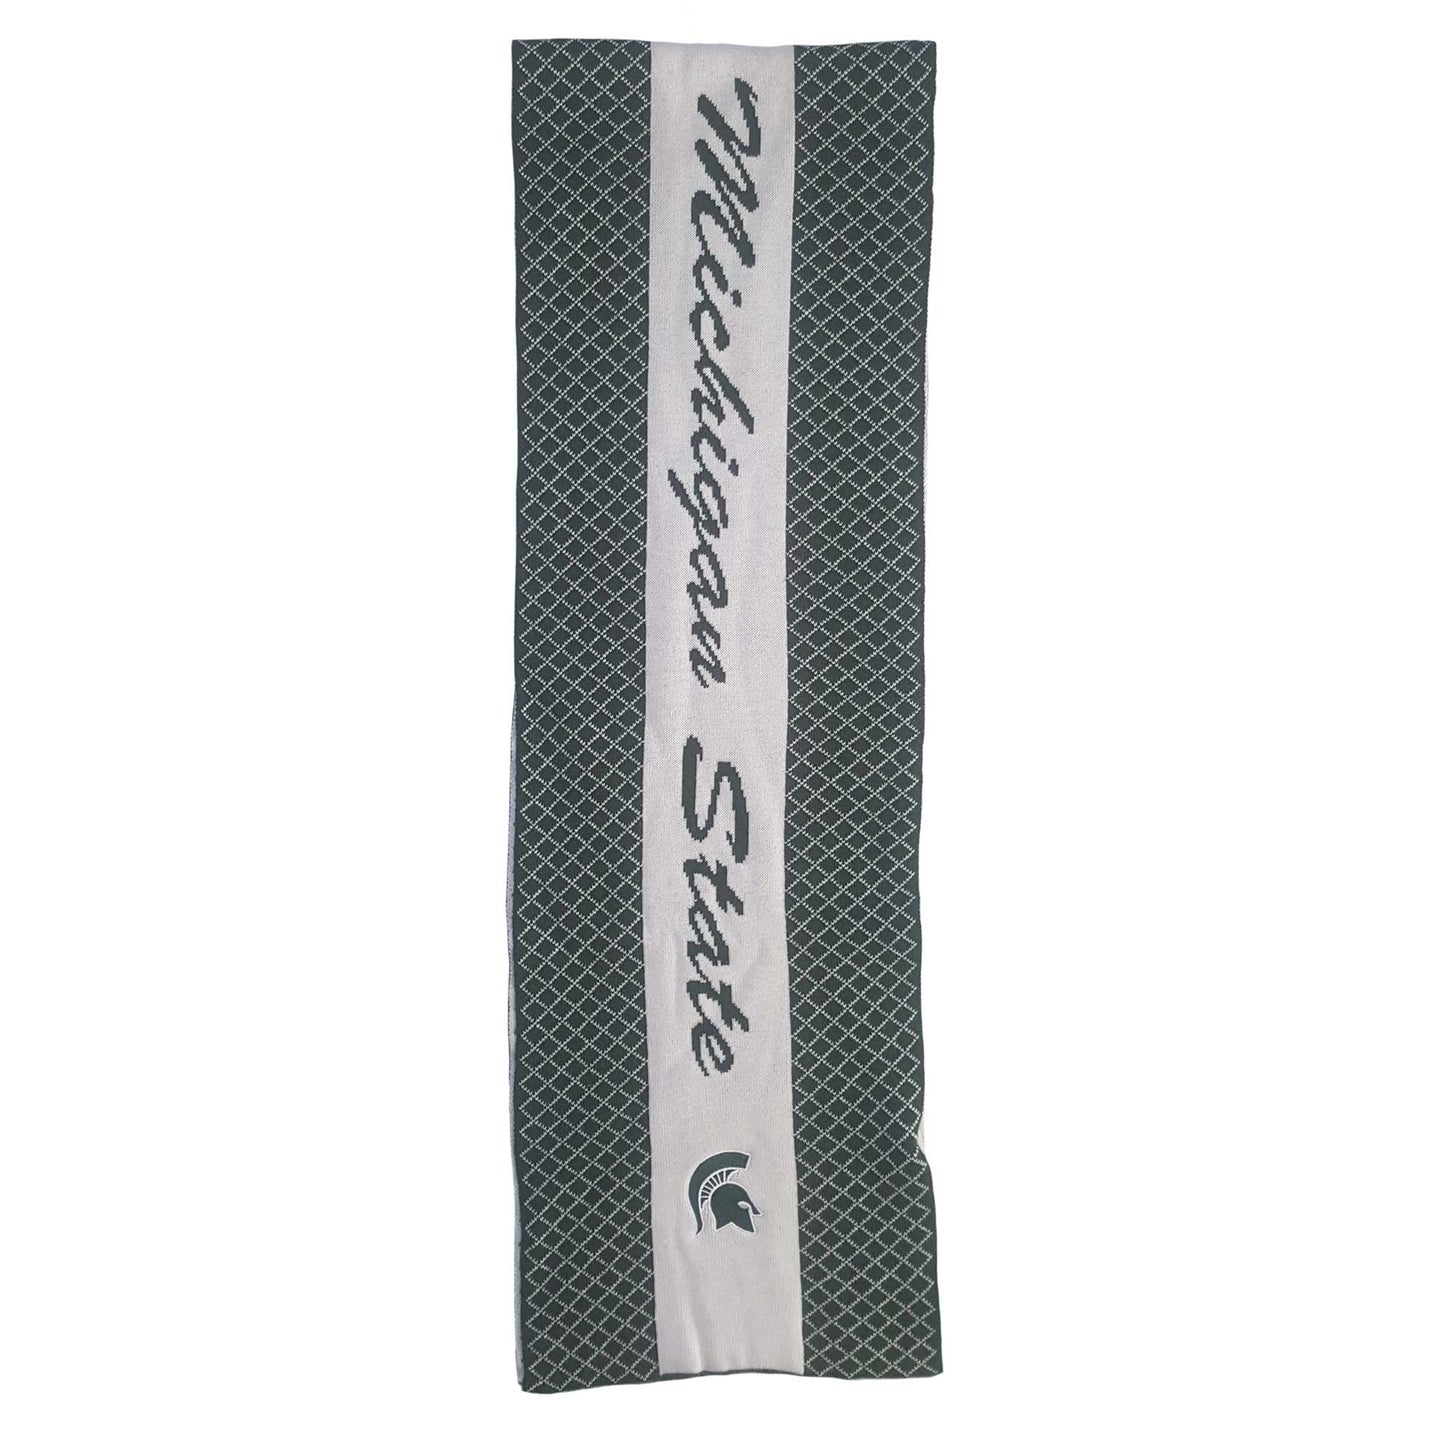 Michigan State Spartans 2 Tone Knit Scarf